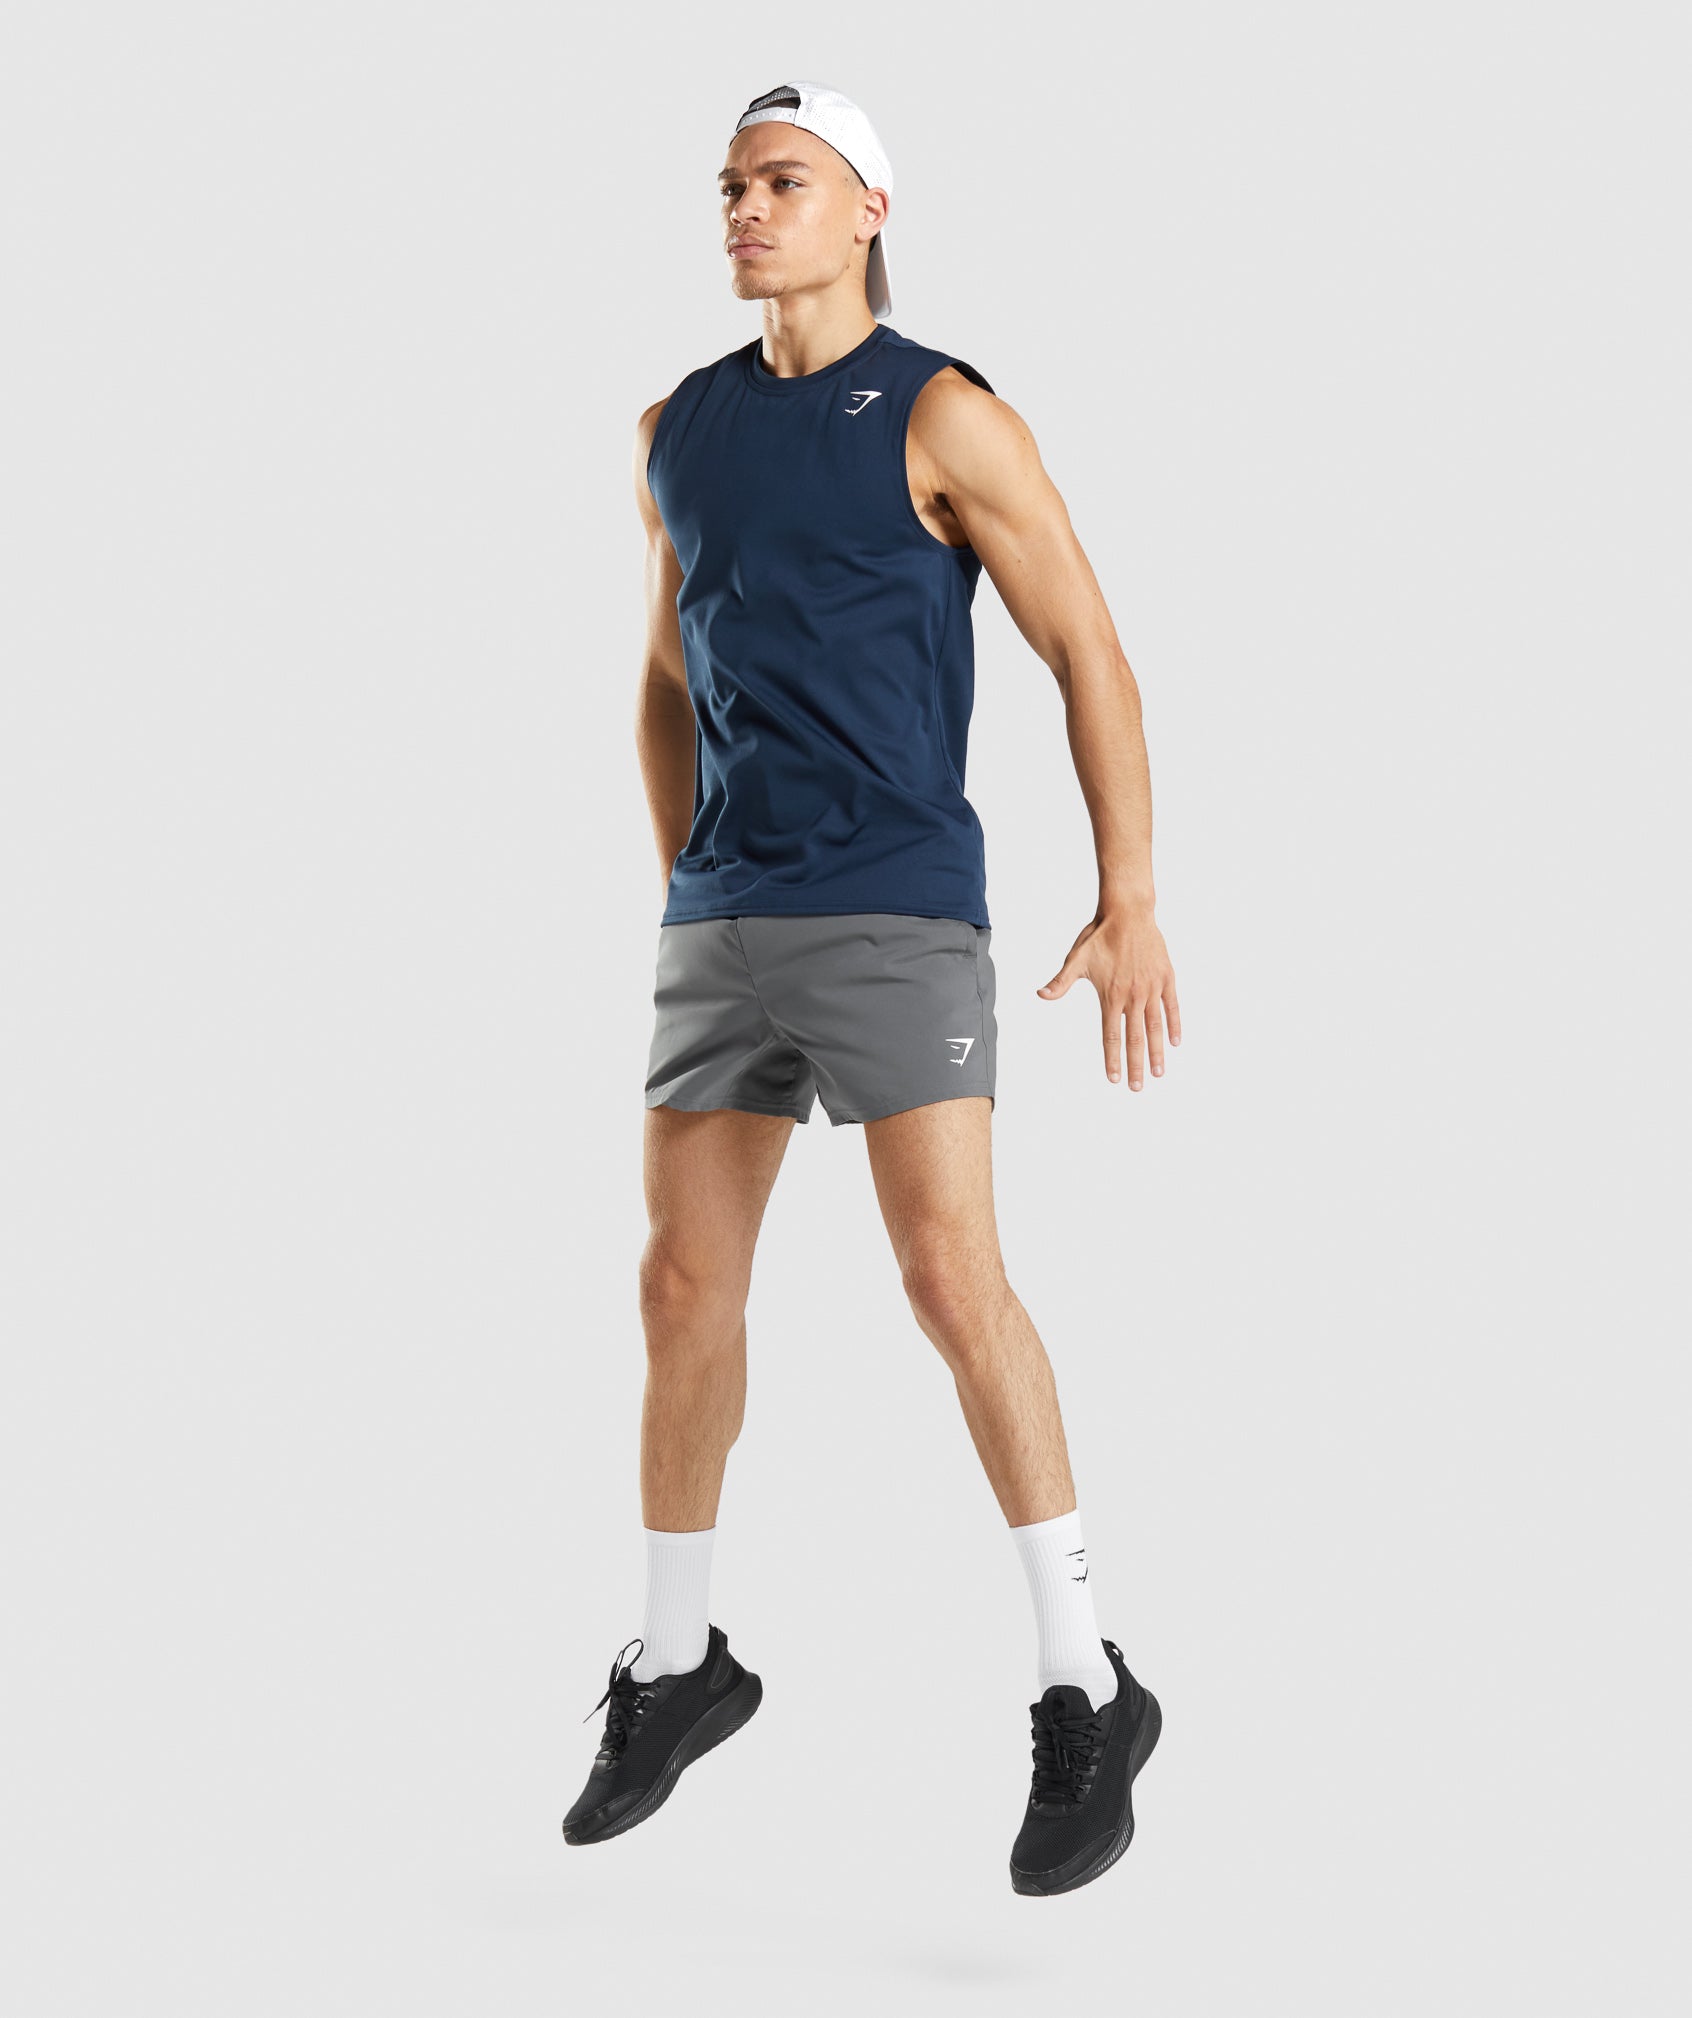 Gymshark Arrival 5 Shorts - Petrol Blue – Client 446 100K products